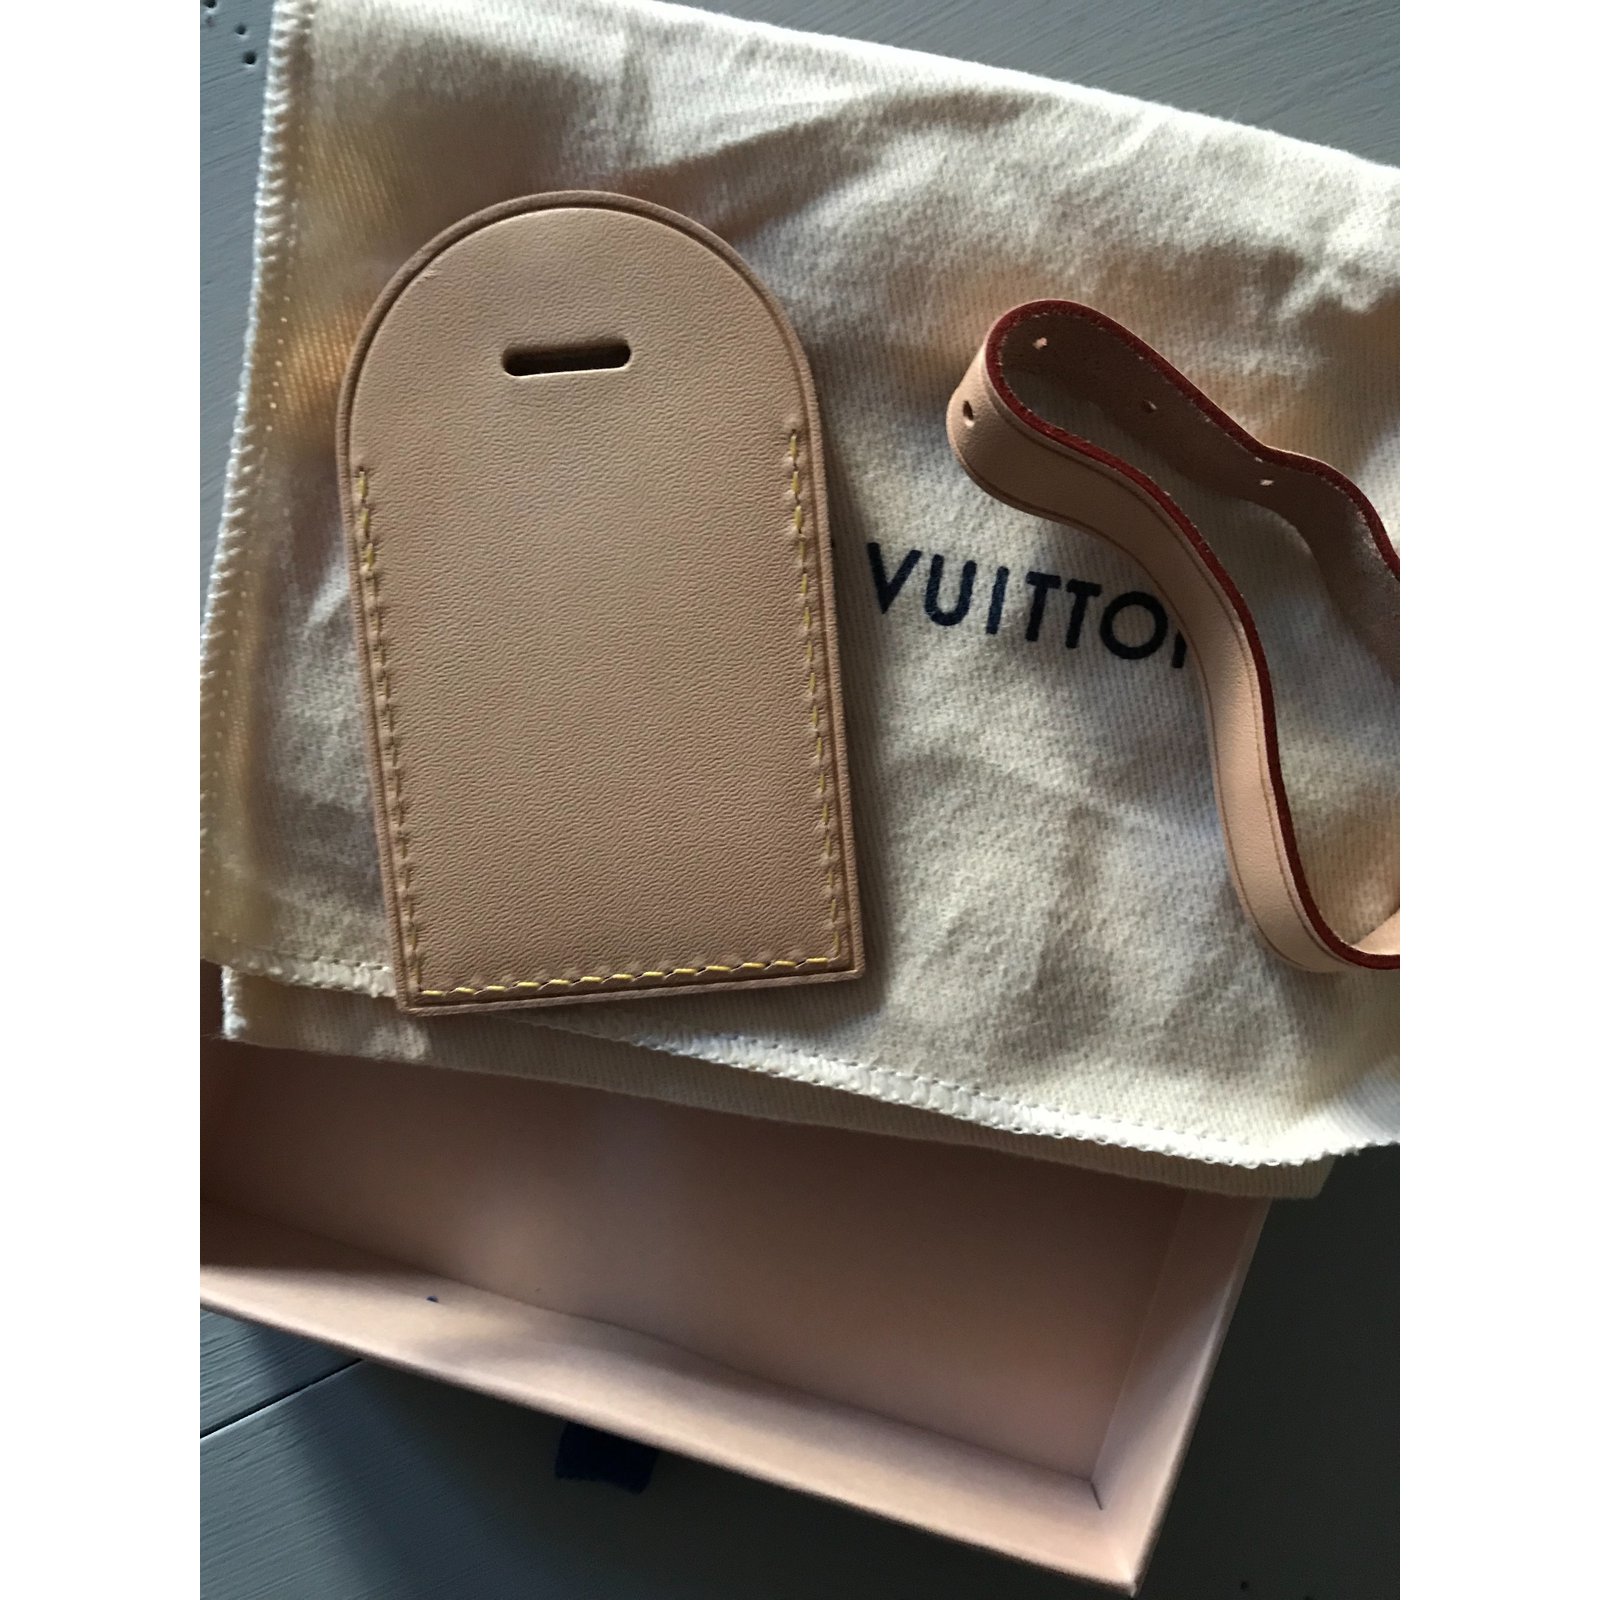 Louis Vuitton Large size vacchetta luggage tag hot stamped New